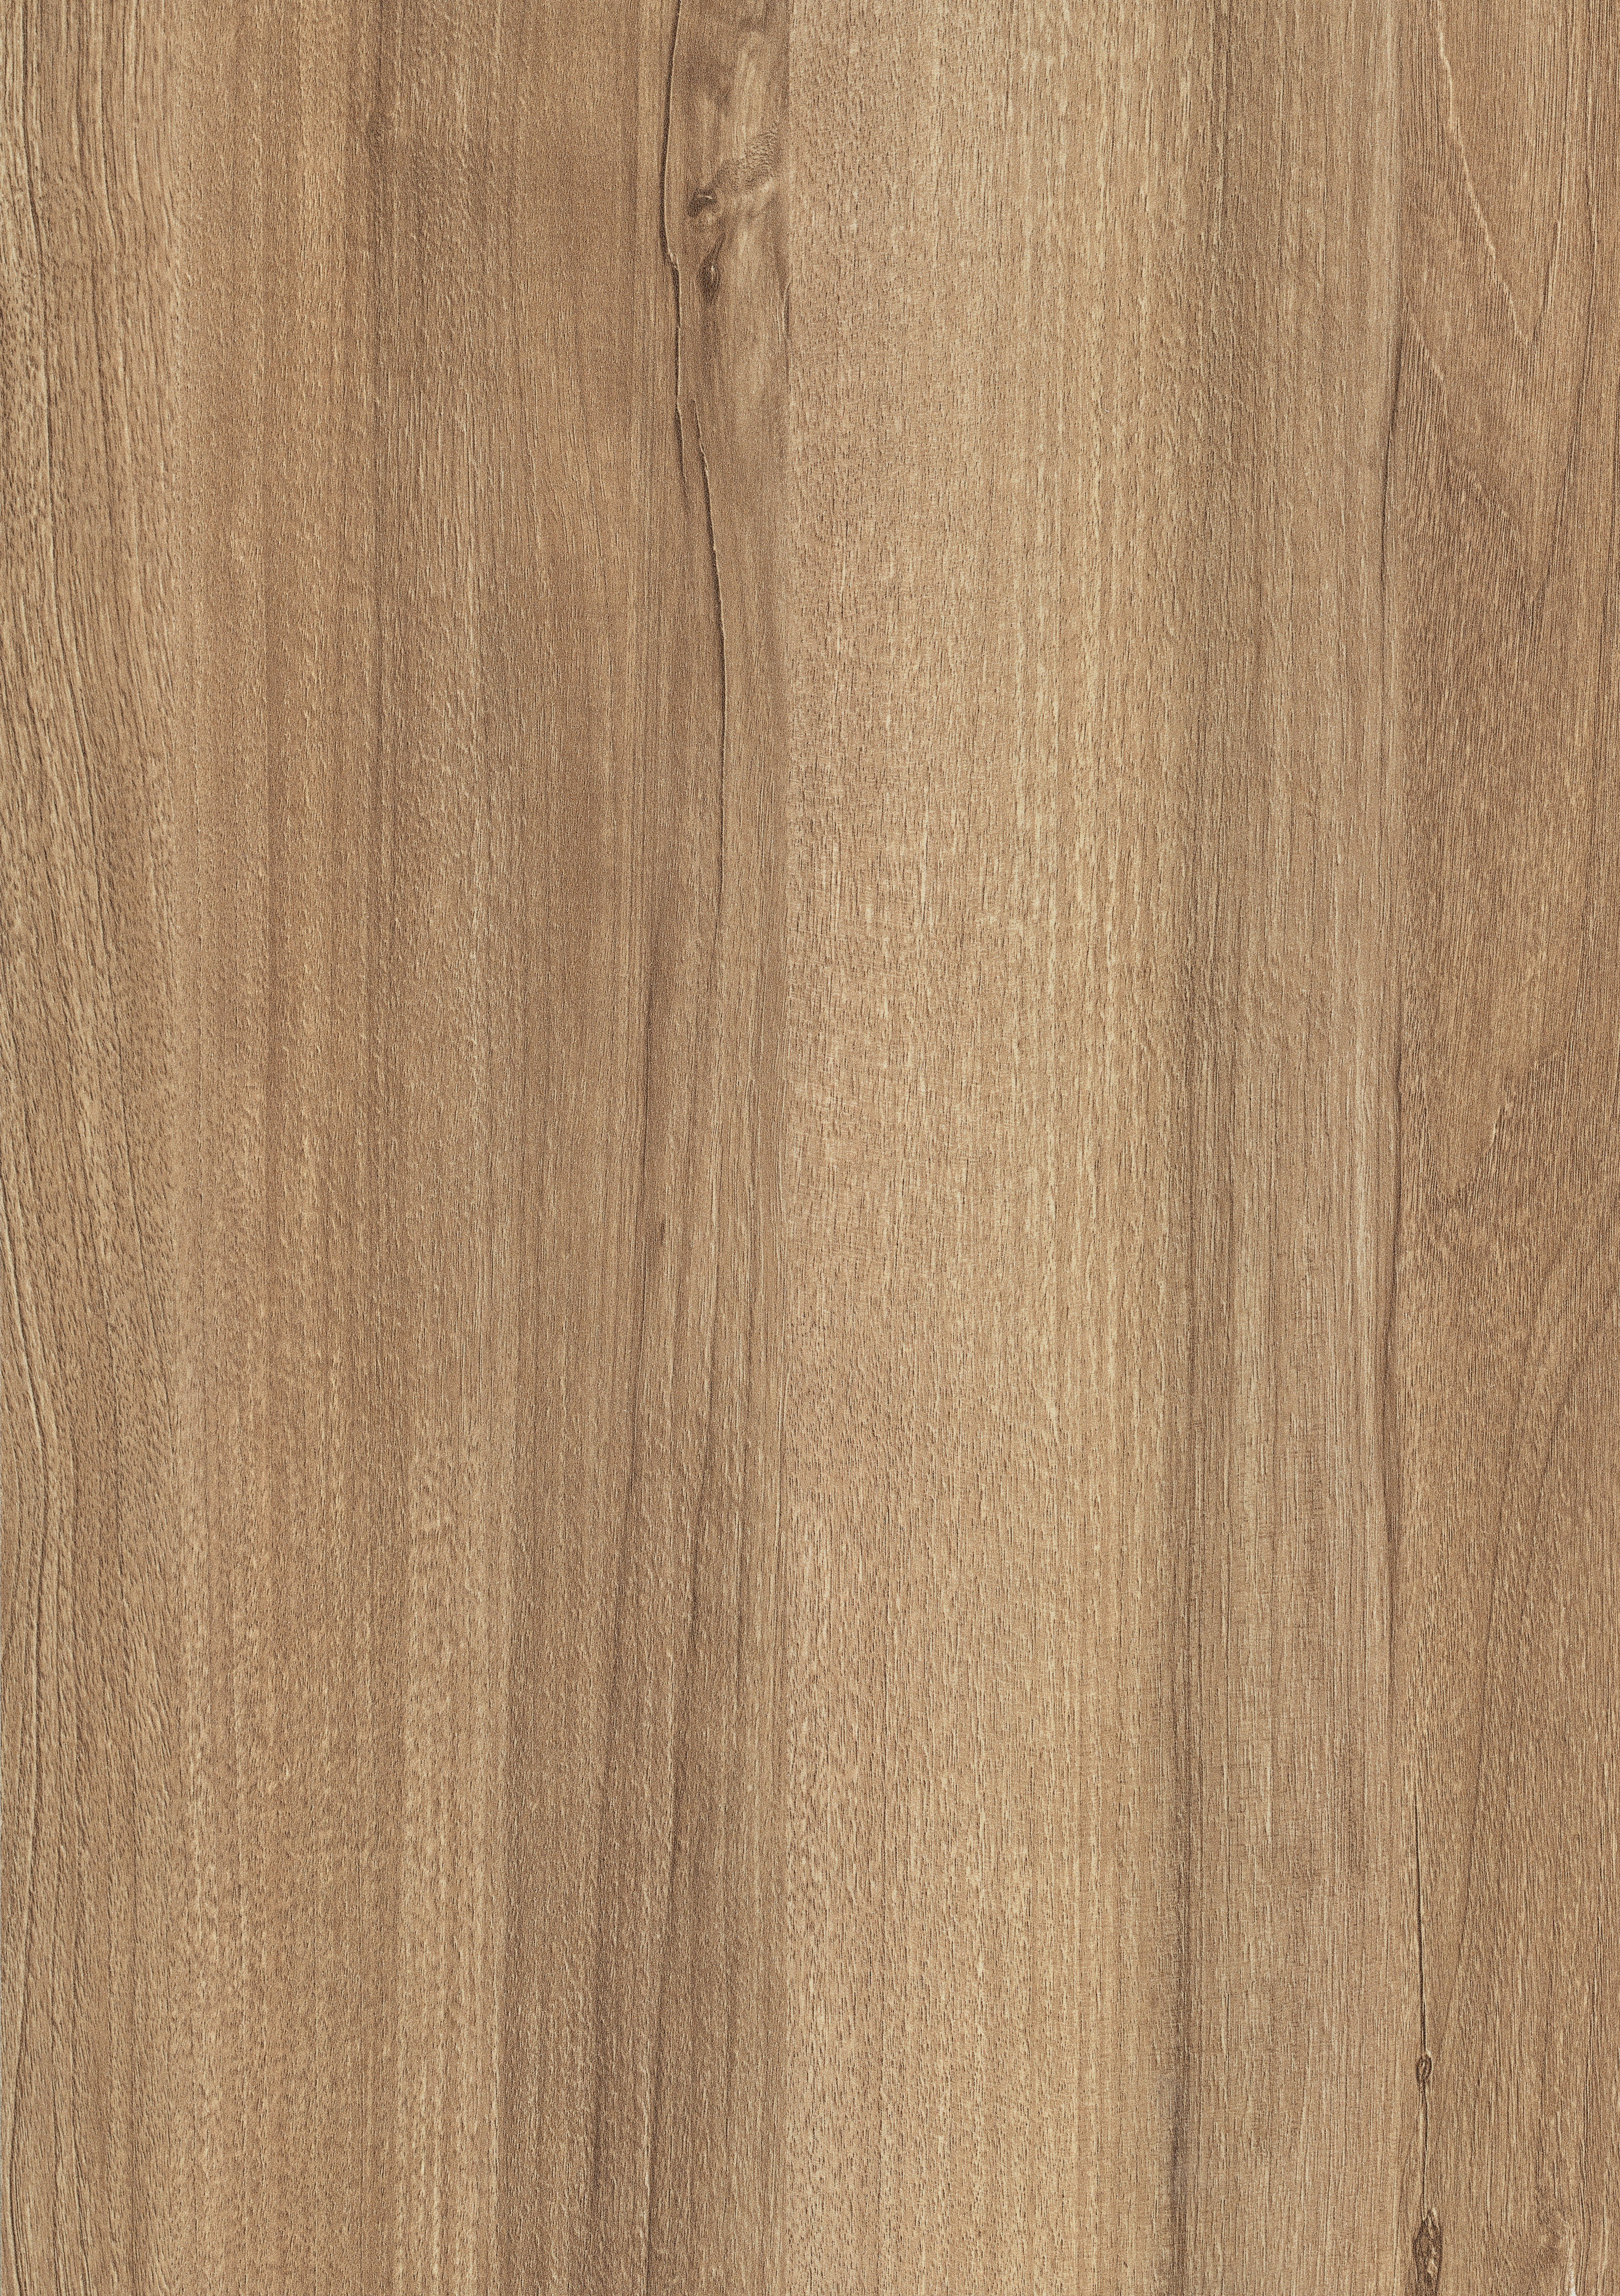 Natural Pacific Walnut H3700 ST10